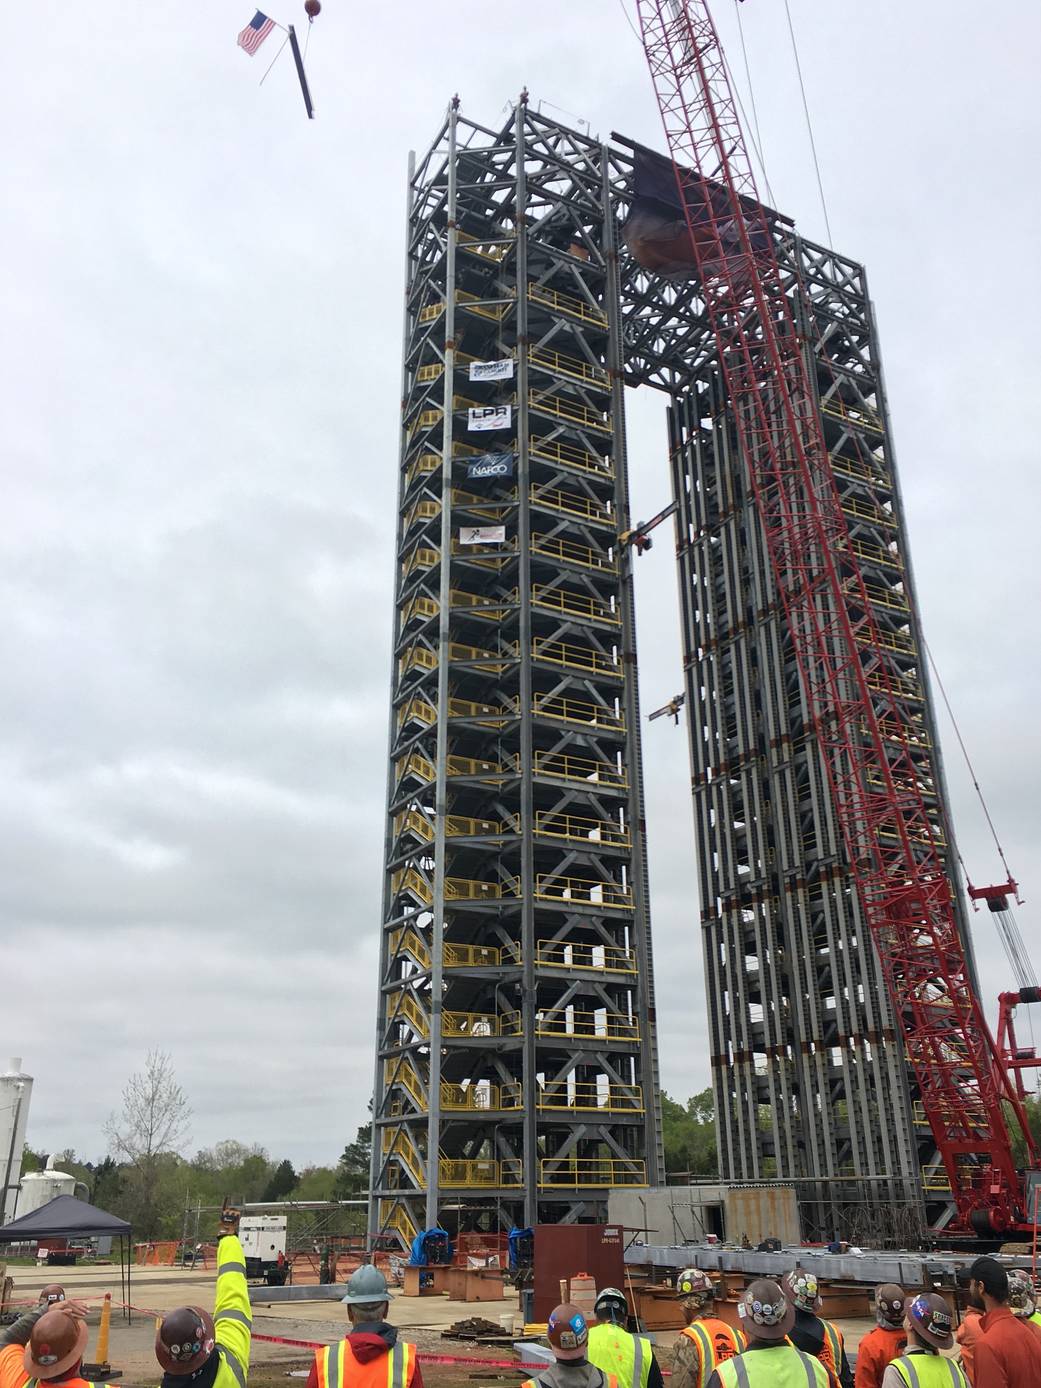 Test Stand 4693 during "topping out" ceremonies April 12 at NASA's Marshall Space Flight Center in Huntsville, Alabama. 